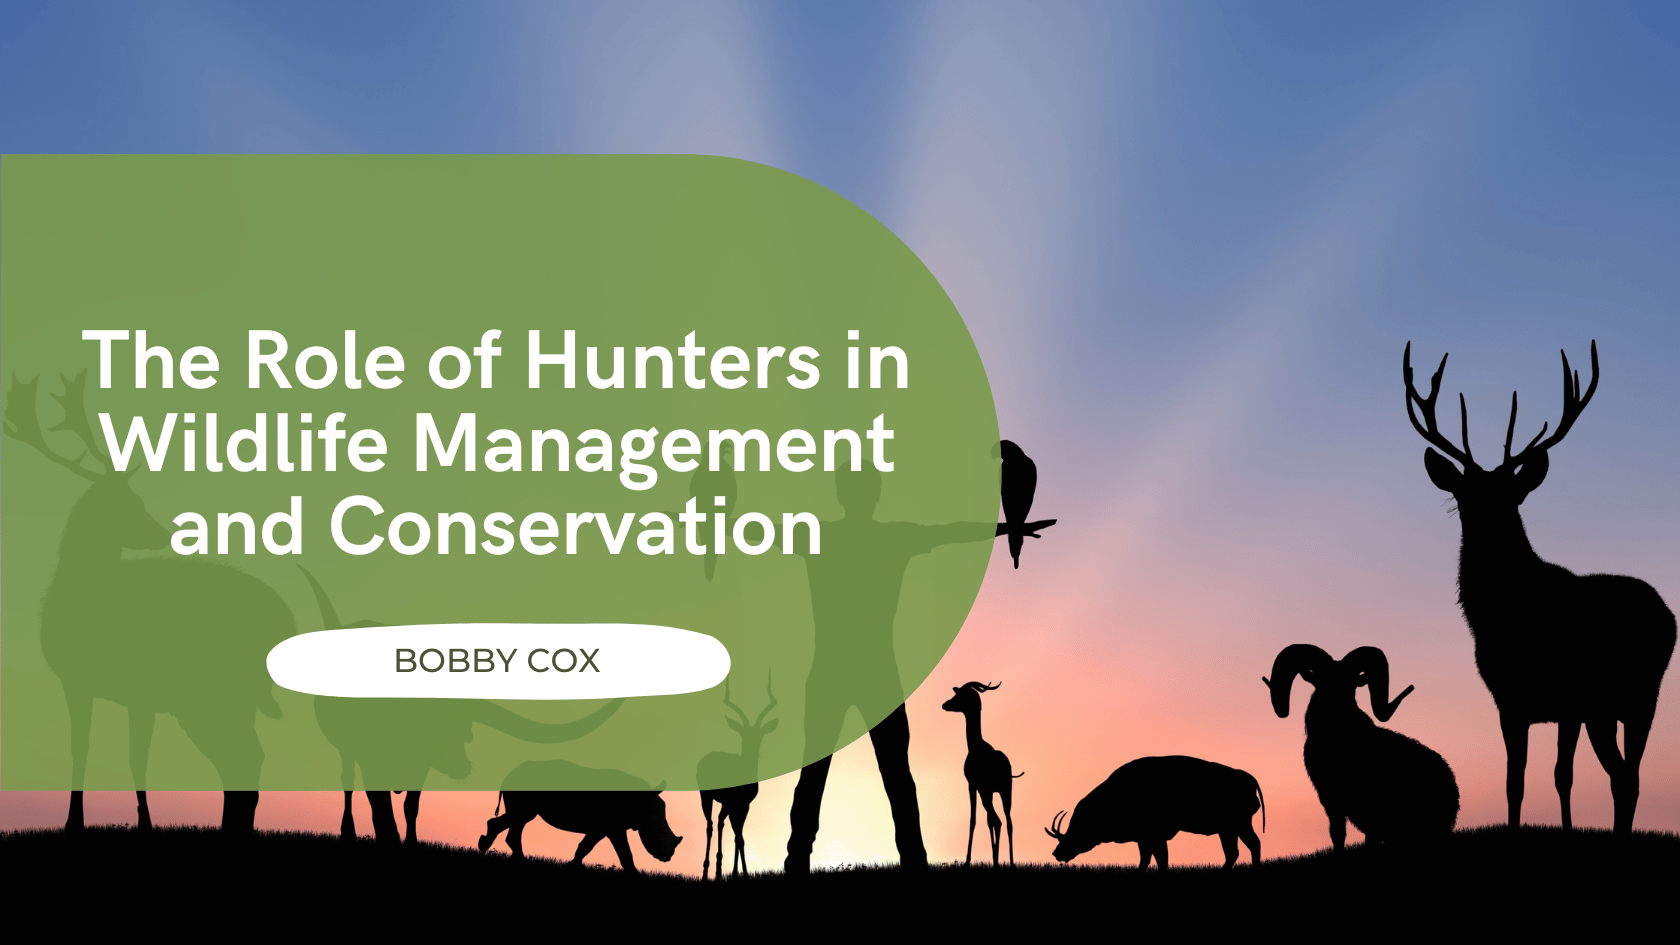 The Role of Hunters in Wildlife Management and Conservation